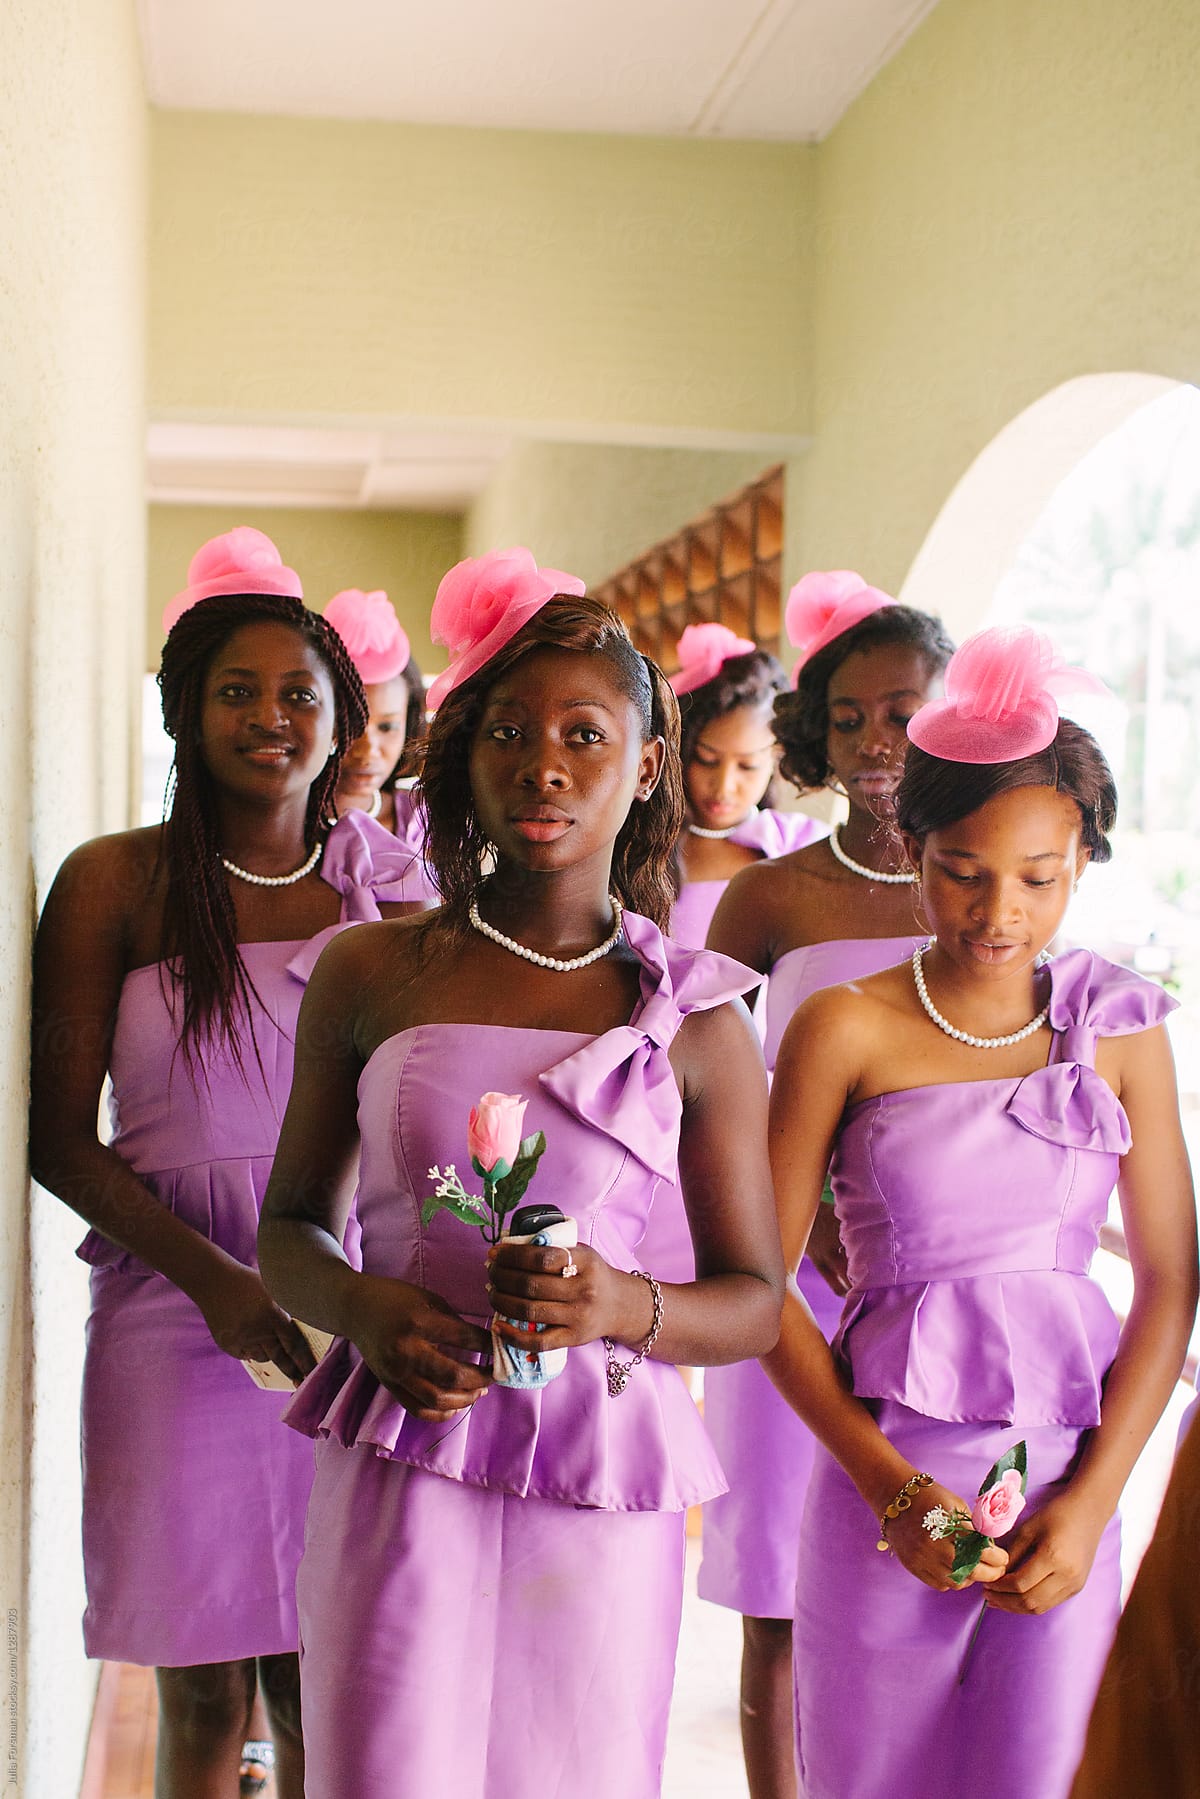 A group of six African bridesmaids wearing purple dresses and pink hats stand waiting before the wedding.